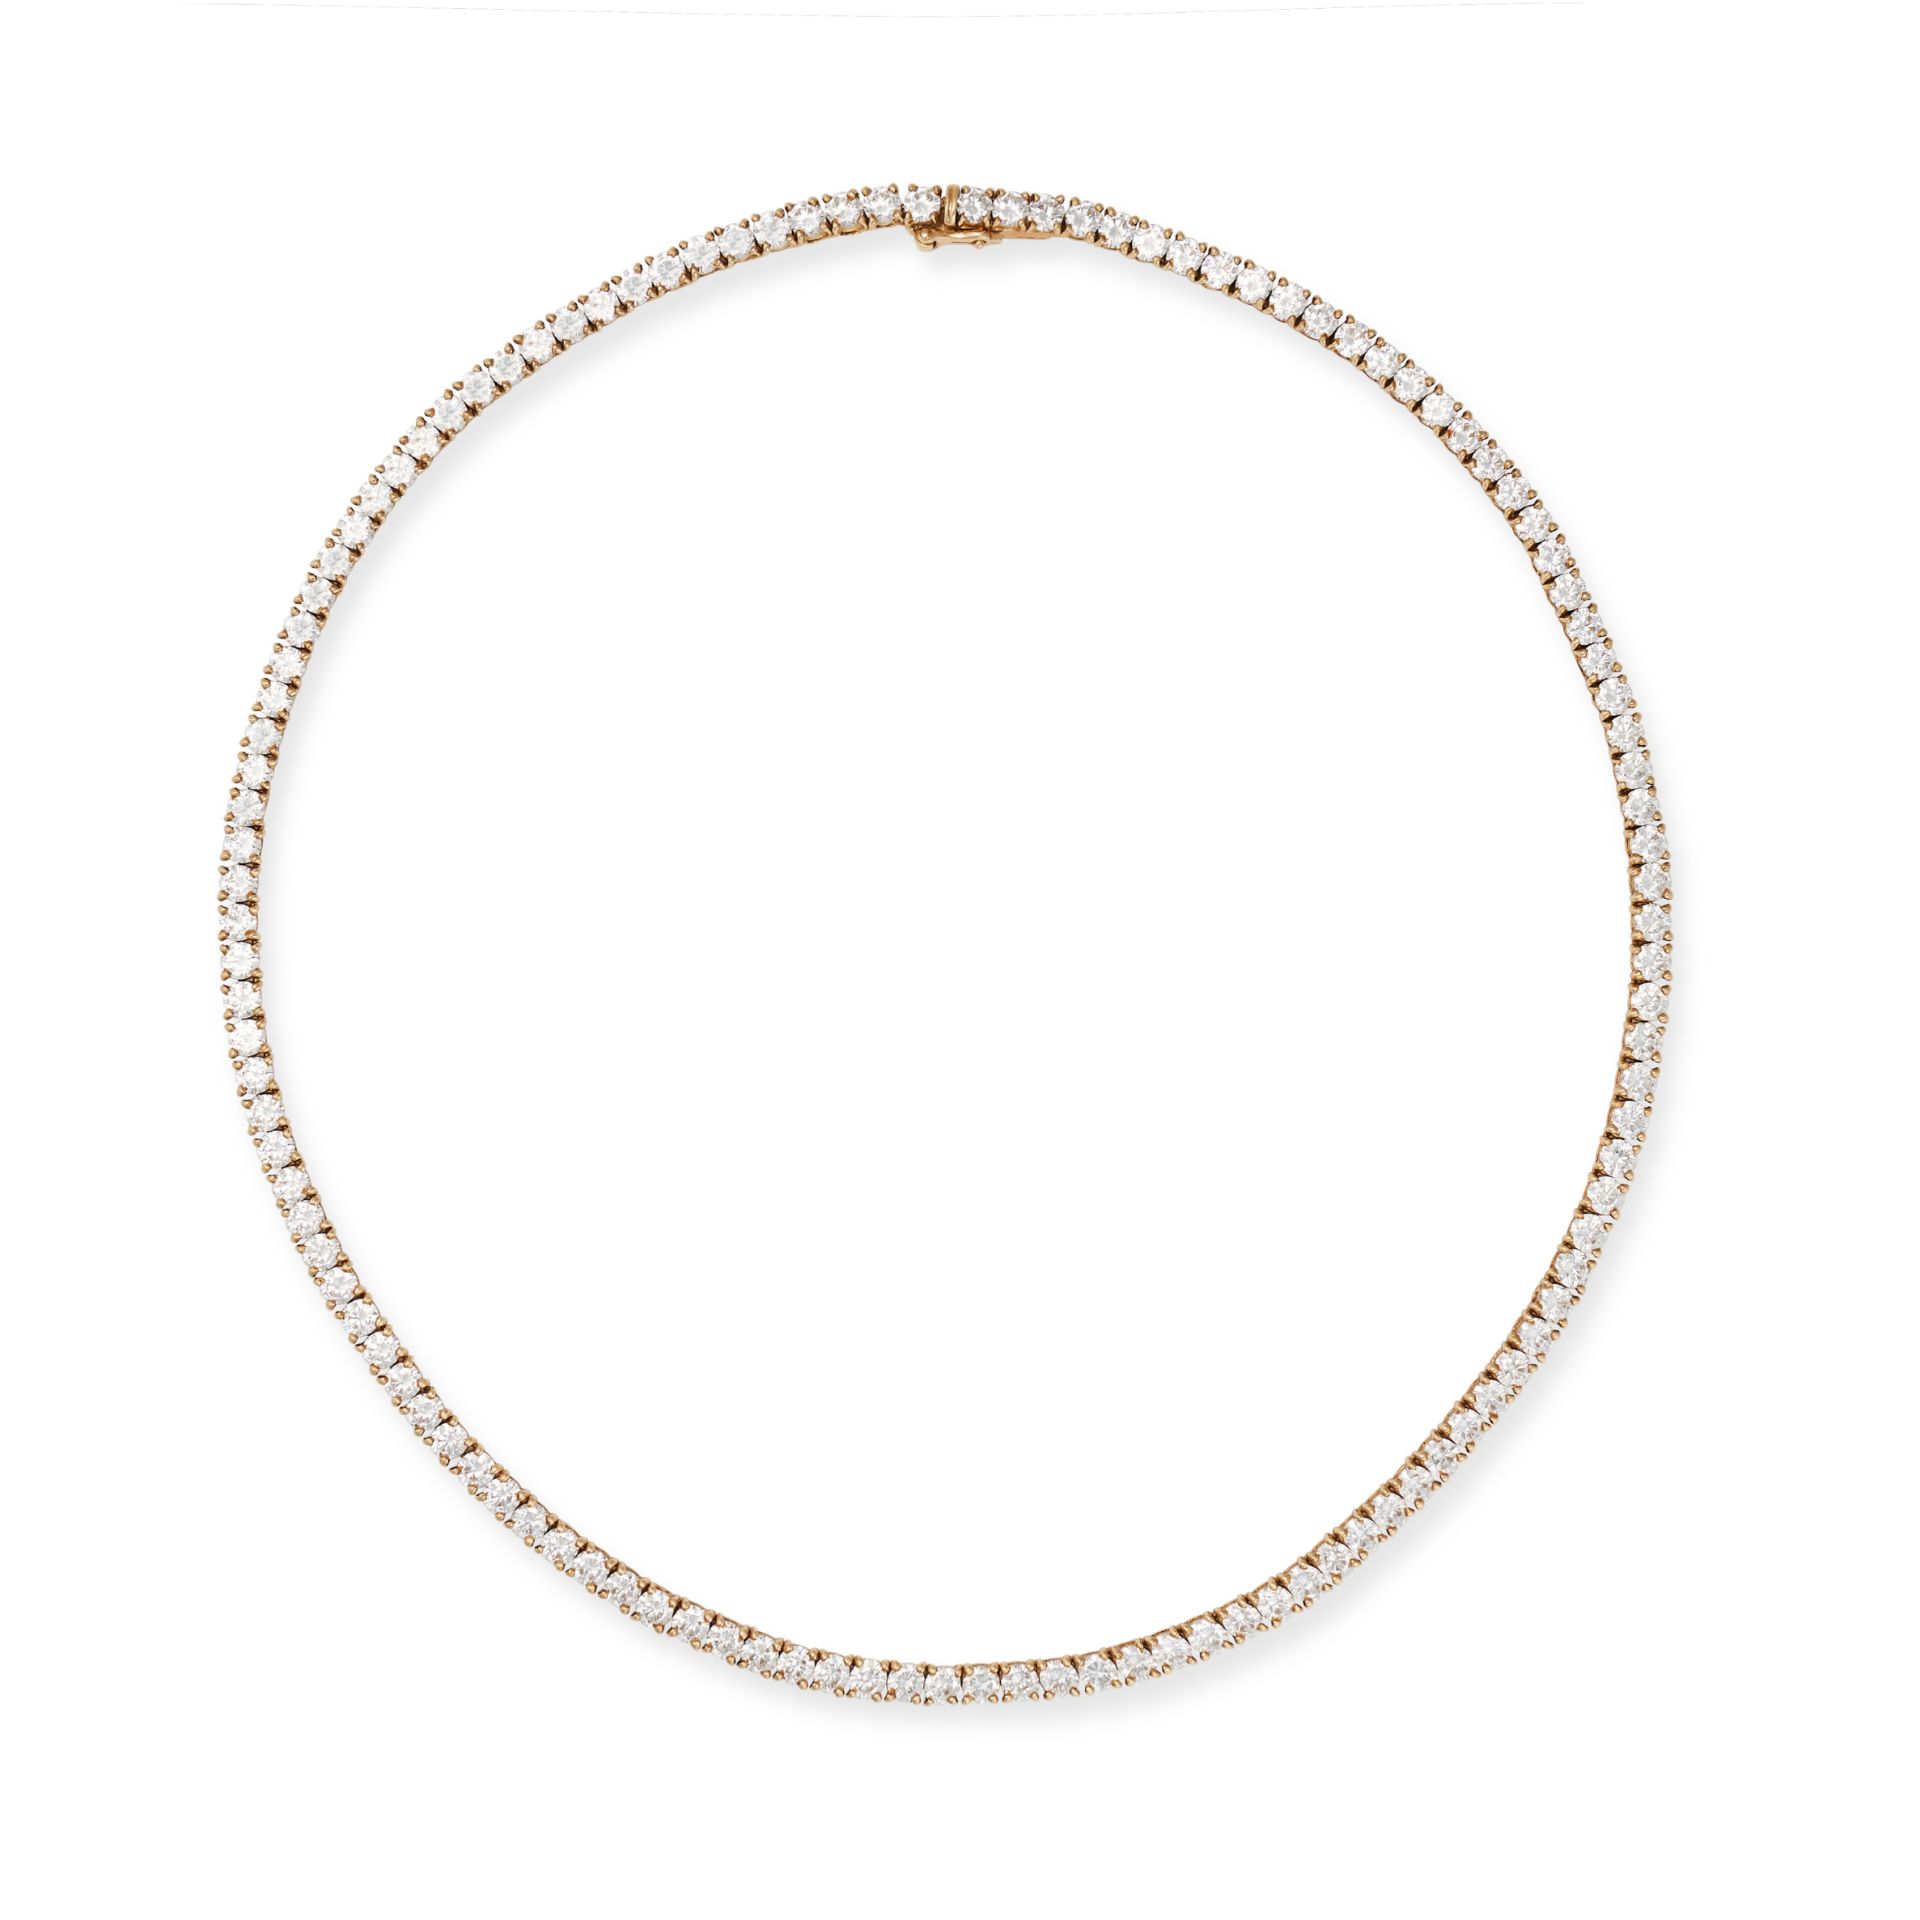 CARTIER, A DIAMOND LINE NECKLACE in 18ct yellow gold, comprising a row of 119 round brilliant cut...